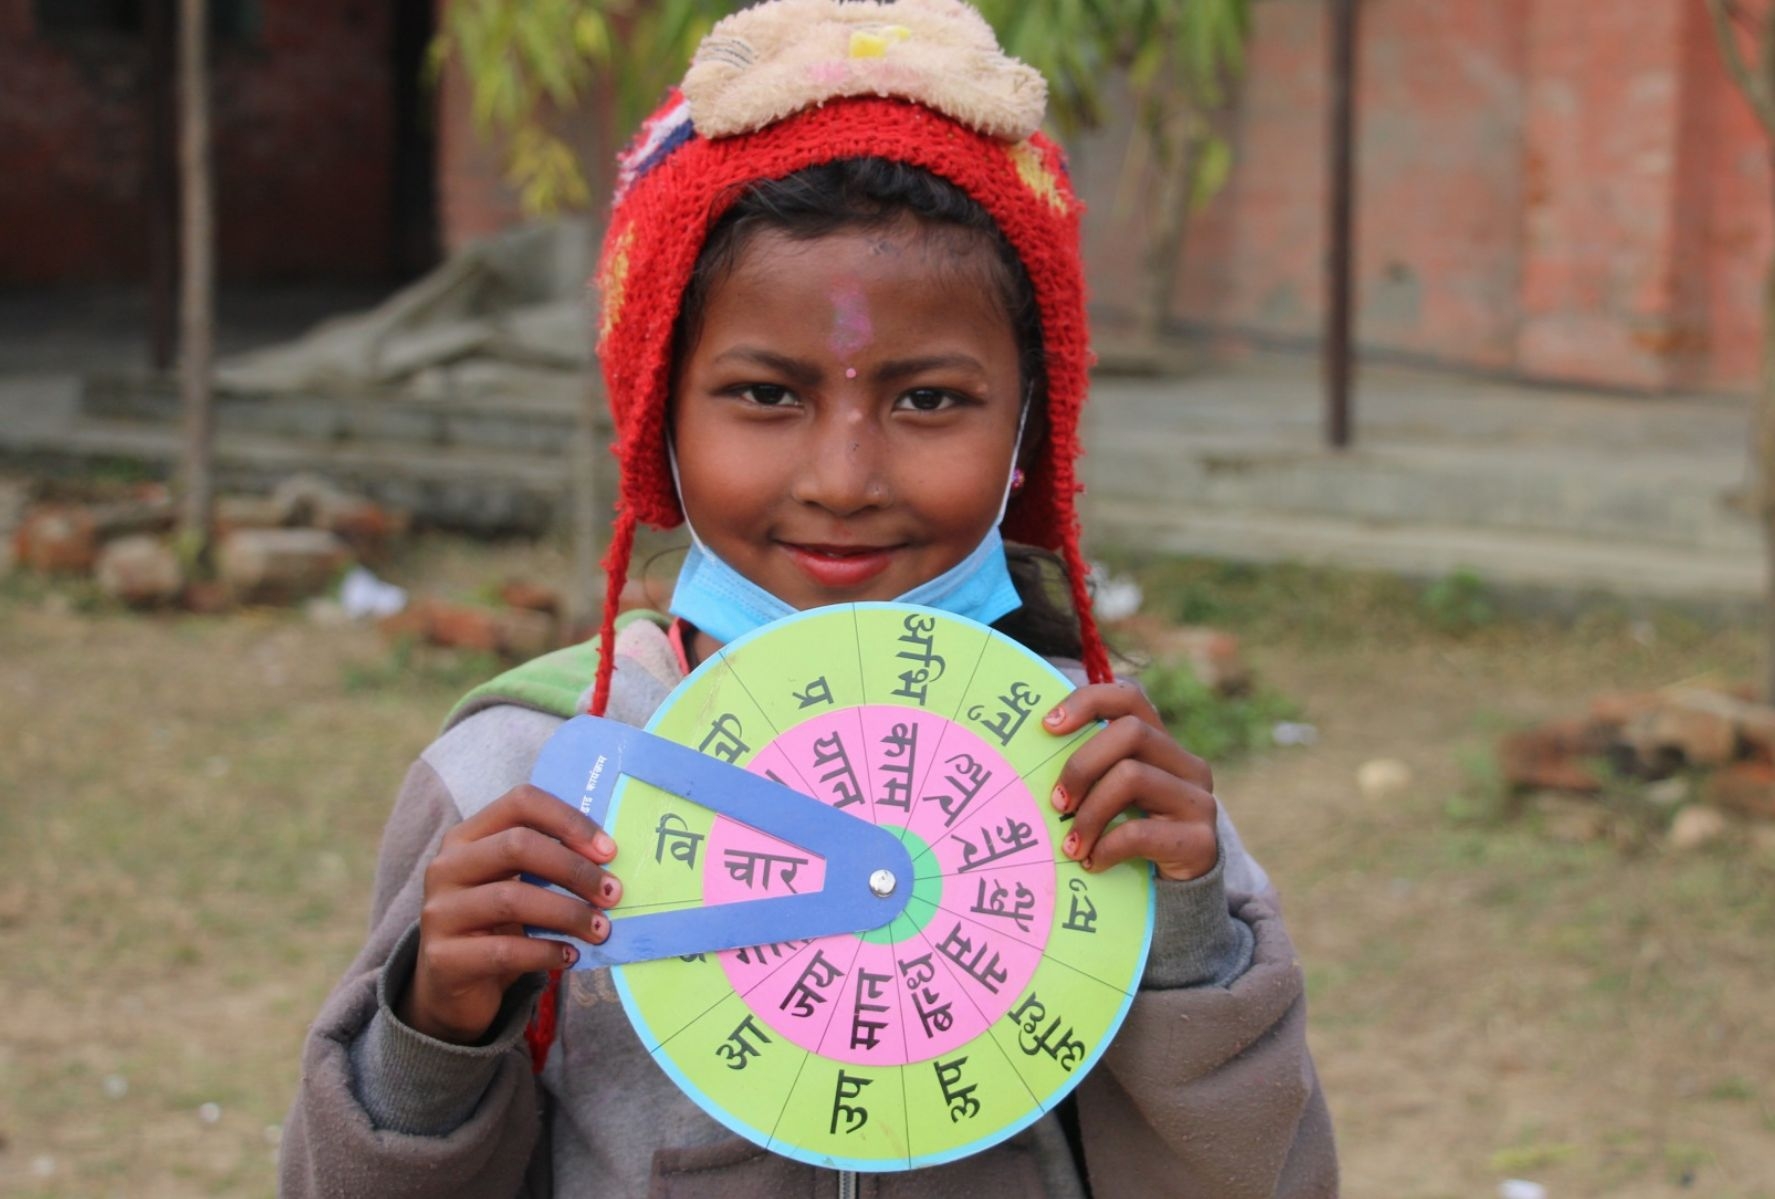 Moving Beyond “Business as Usual” to Measure Student Learning During the COVID-19 Pandemic: Nepal's Classroom-Based Early Grade Reading Assessment